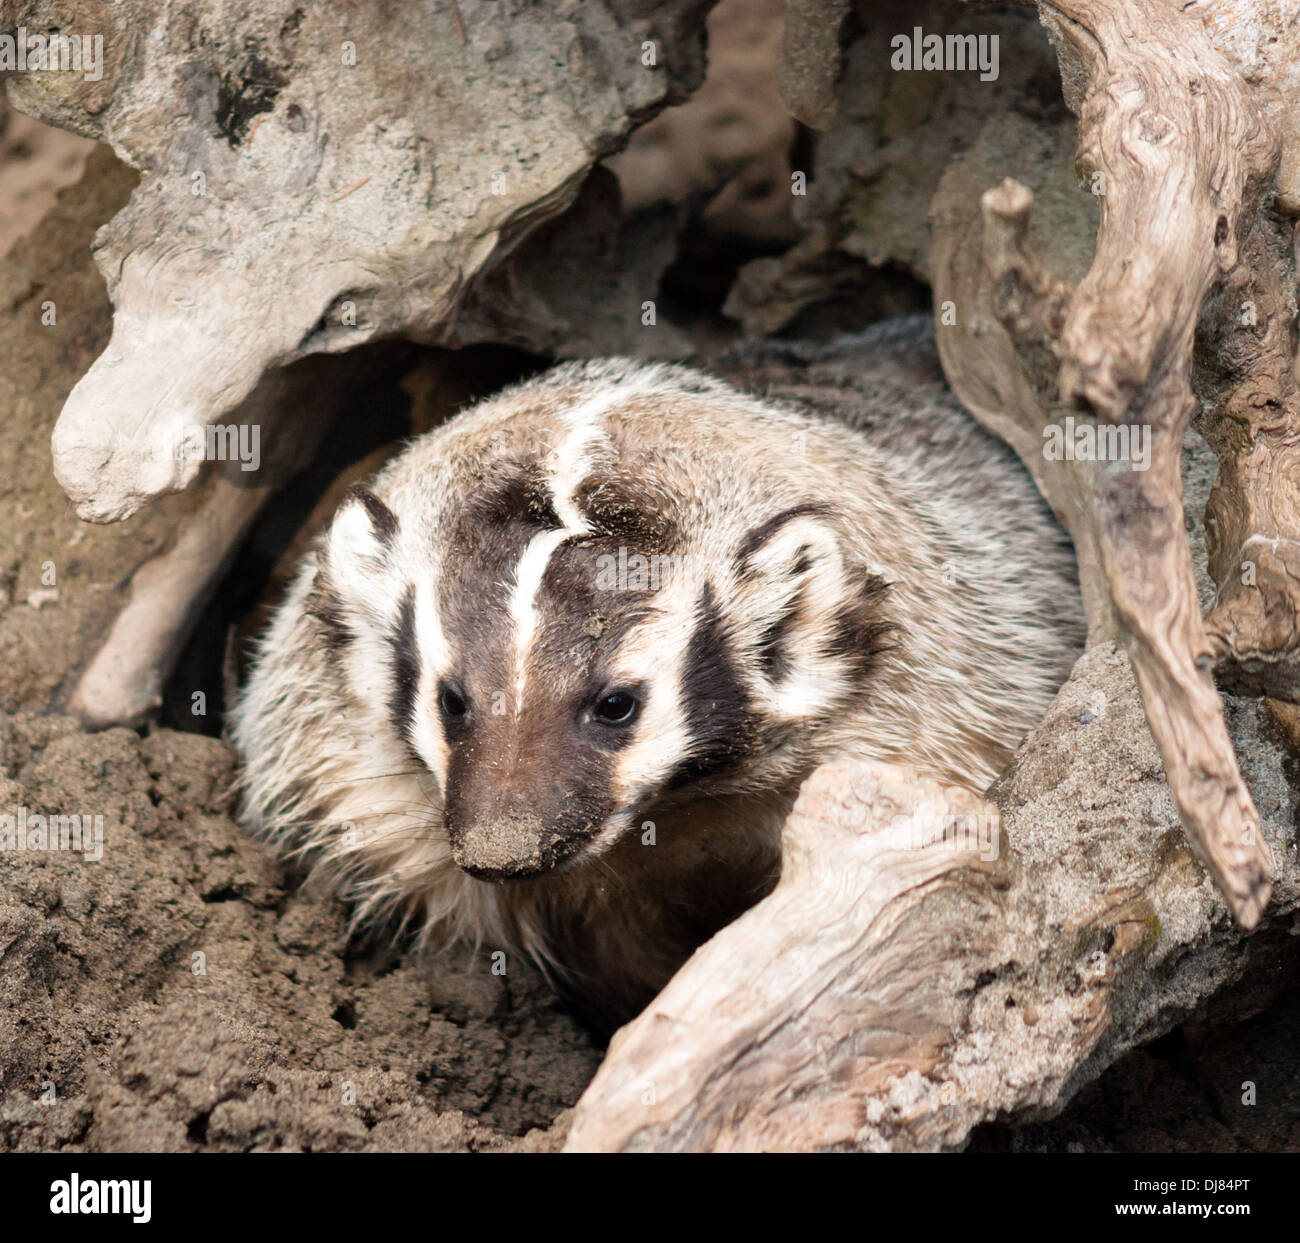 badger; wildlife; animal; american badger; closeup; nature; outdoors; wild; isolated; mammal; forest; funny; fauna; predator; Stock Photo